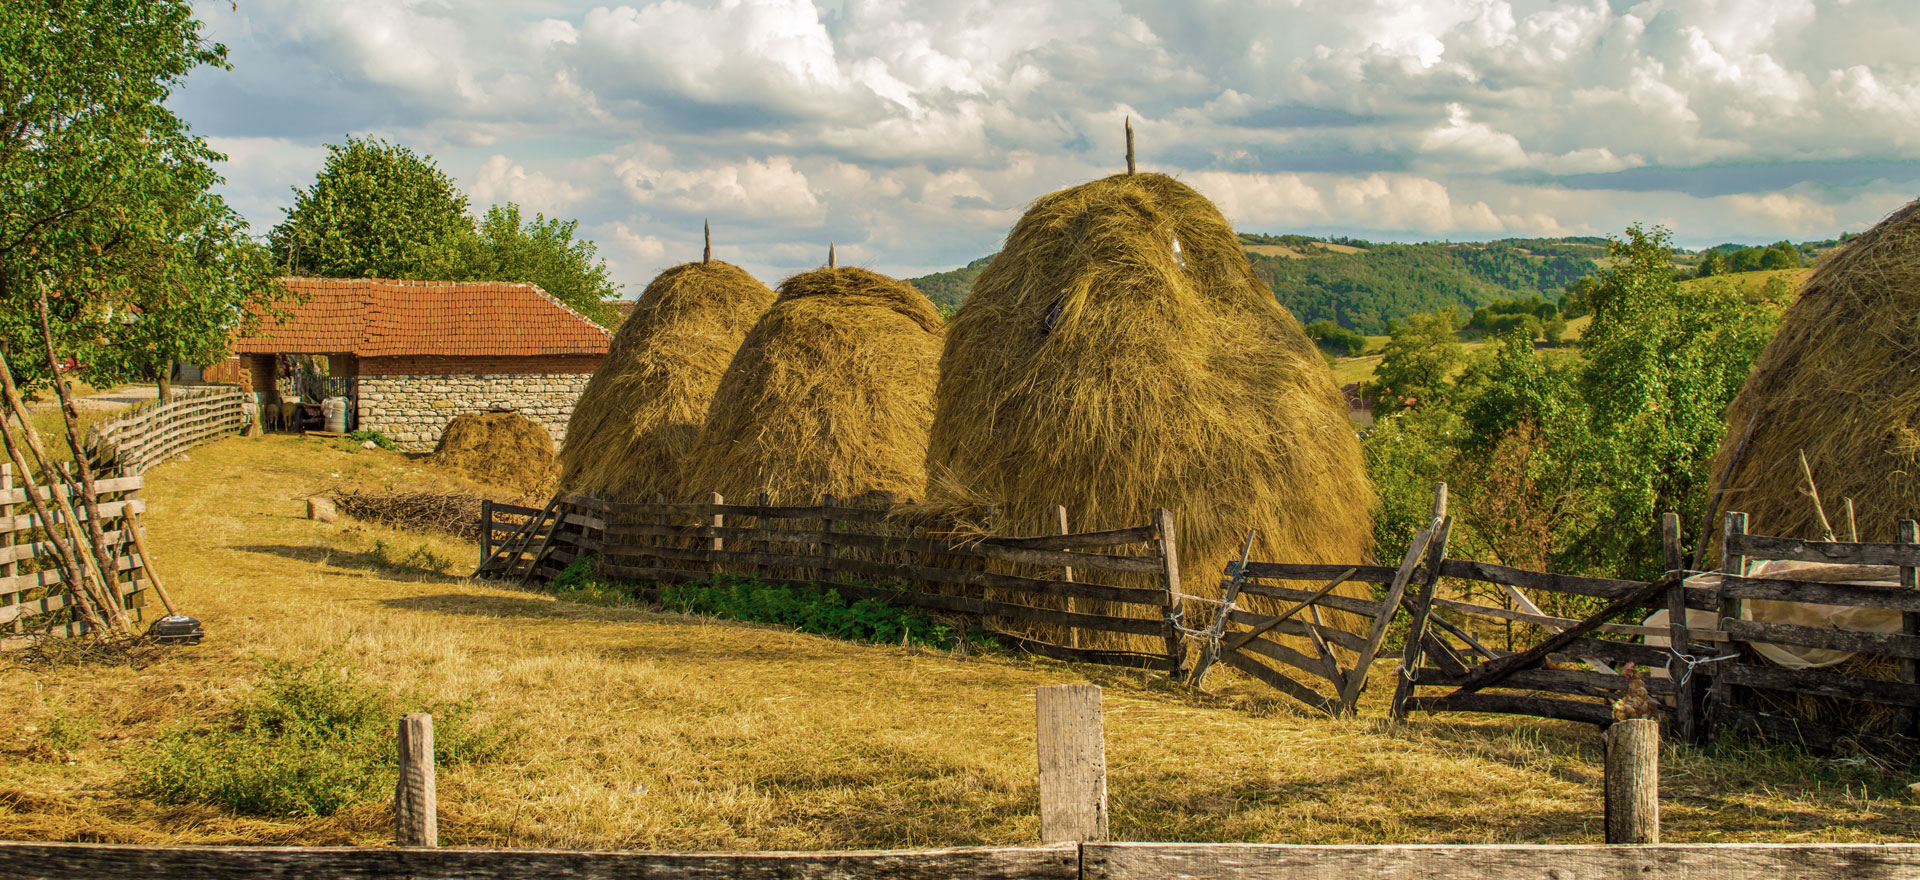 Haystacks in rural village - Serbia holidays and tours